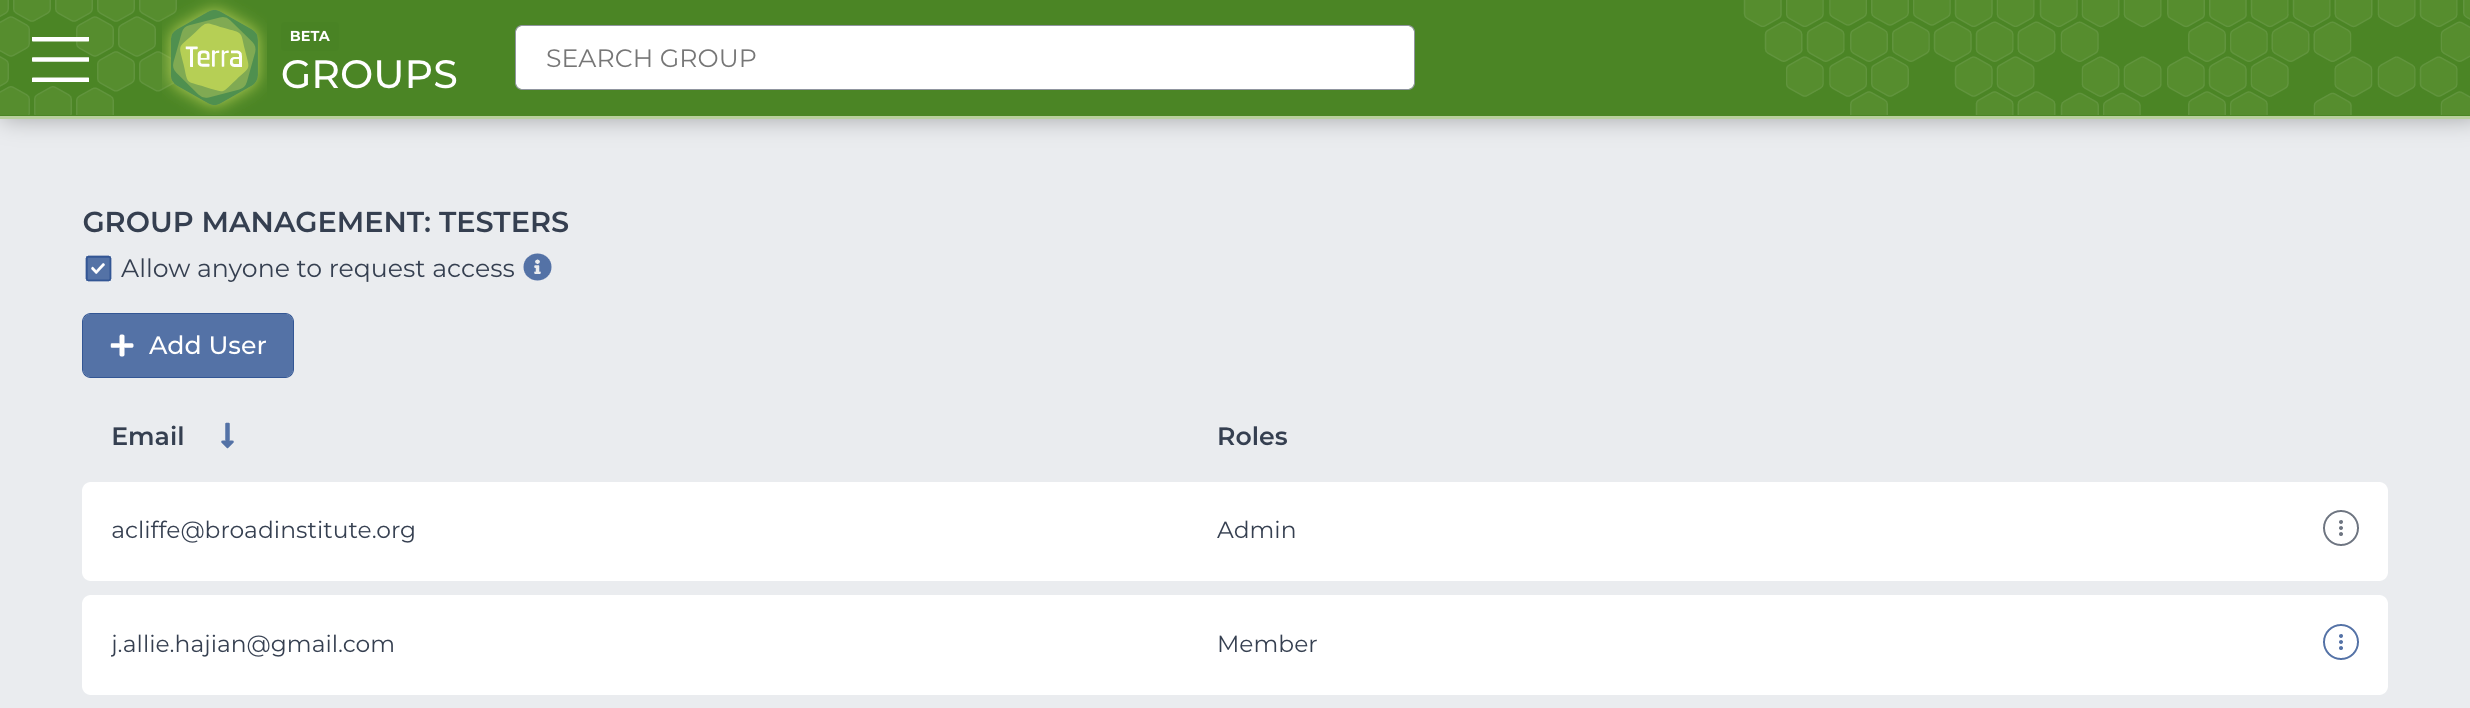 Screenshot of the Group Management page for the group 'testers' with the 'Add user' button at the top and a list of all members of the group and their roles below.